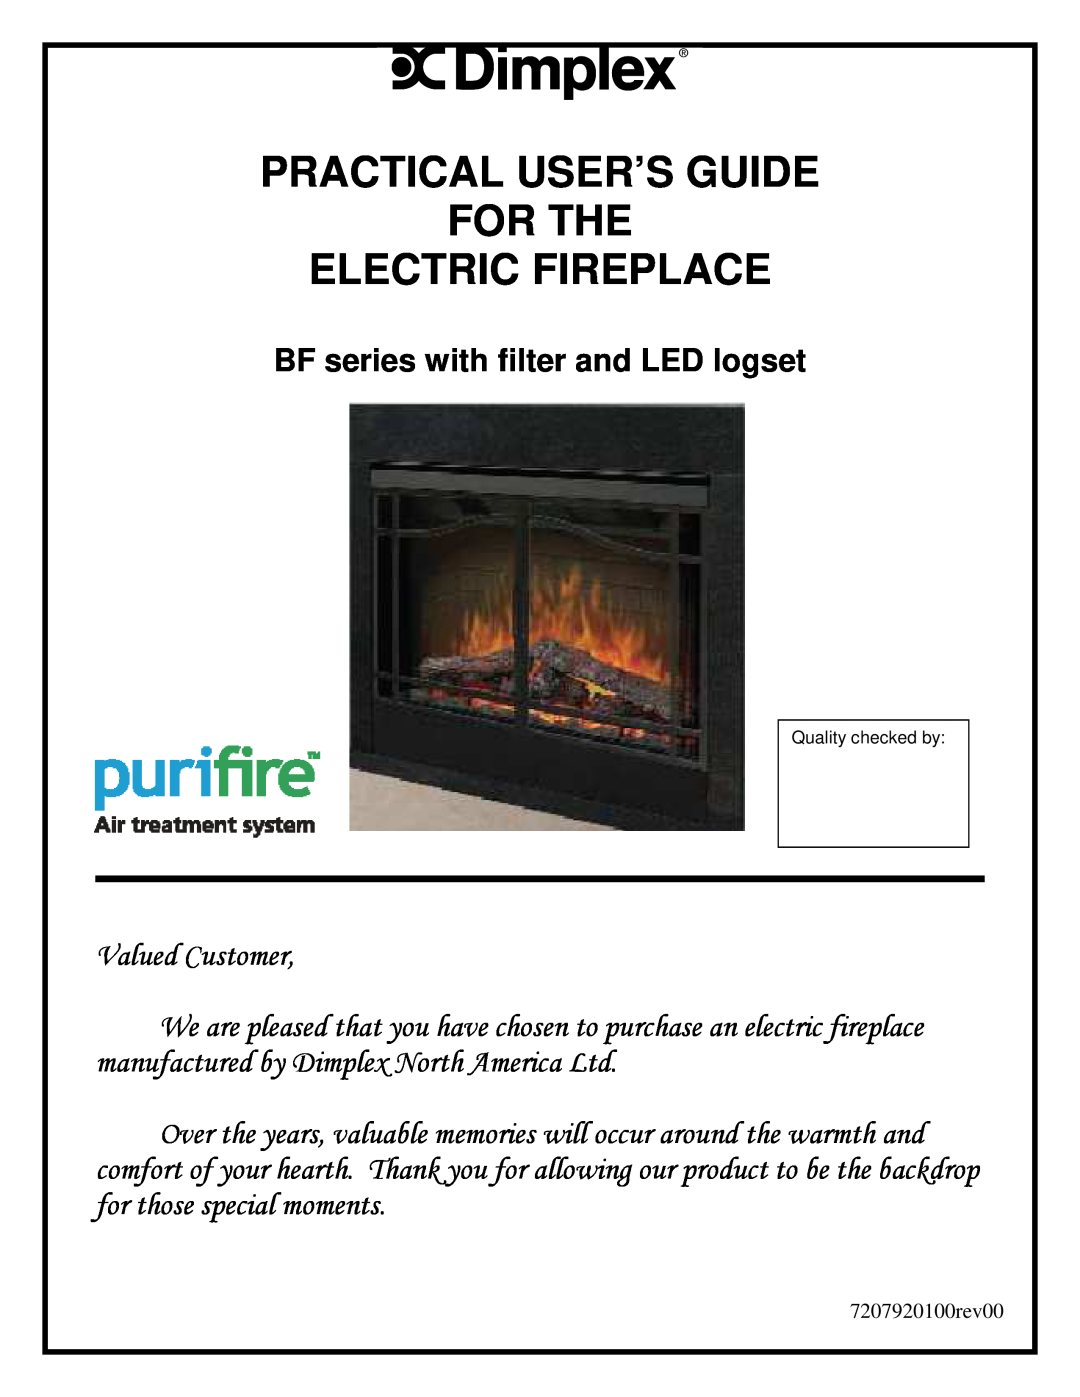 Dimplex manual BF series with filter and LED logset, Practical User’S Guide For The Electric Fireplace 